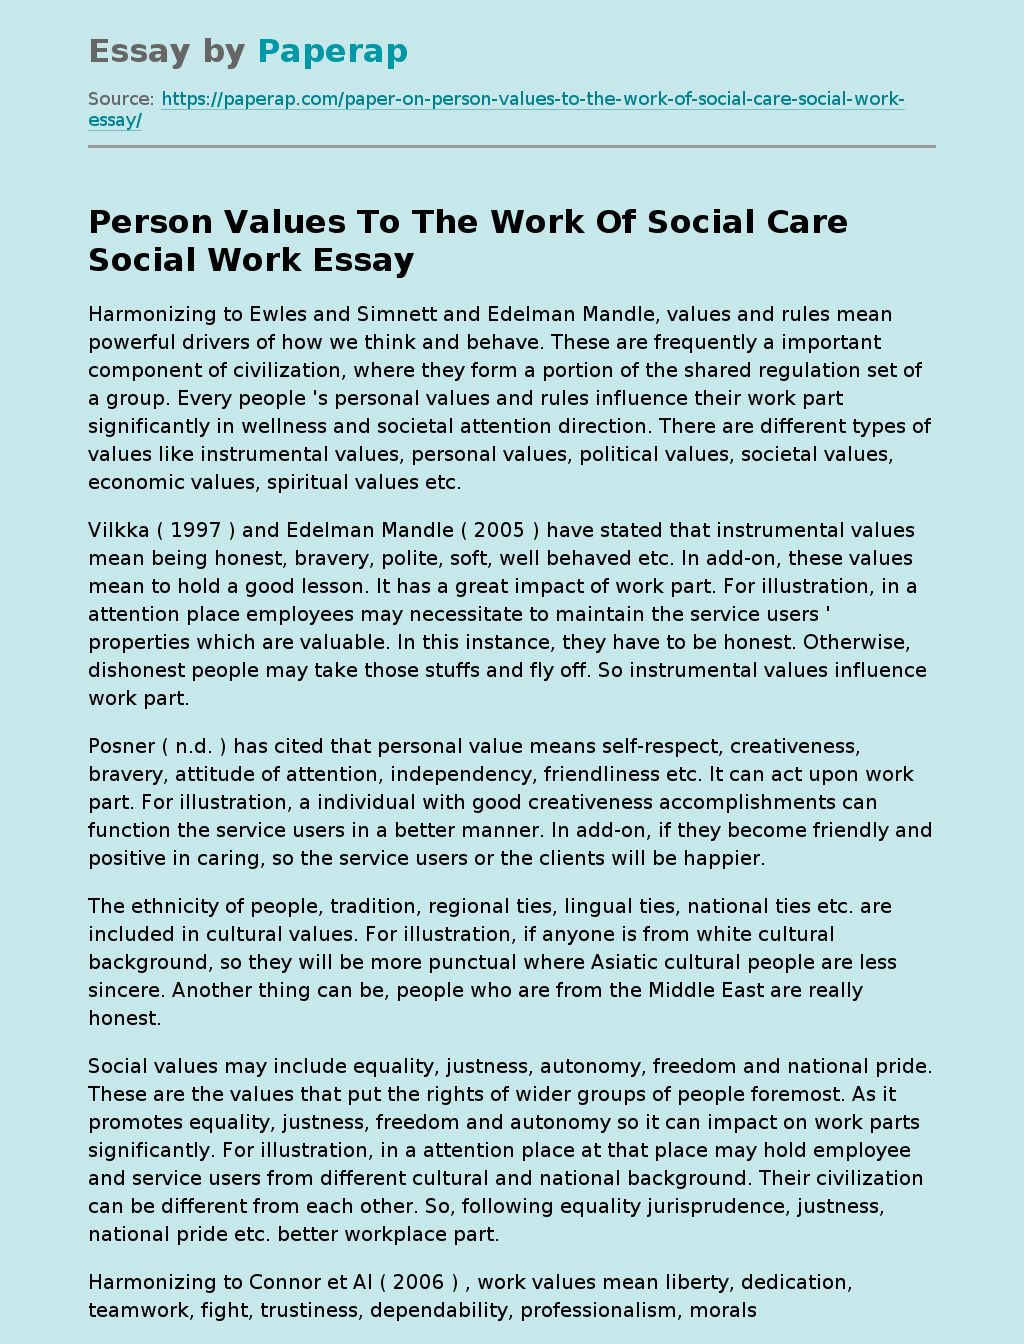 Person Values To The Work Of Social Care Social Work